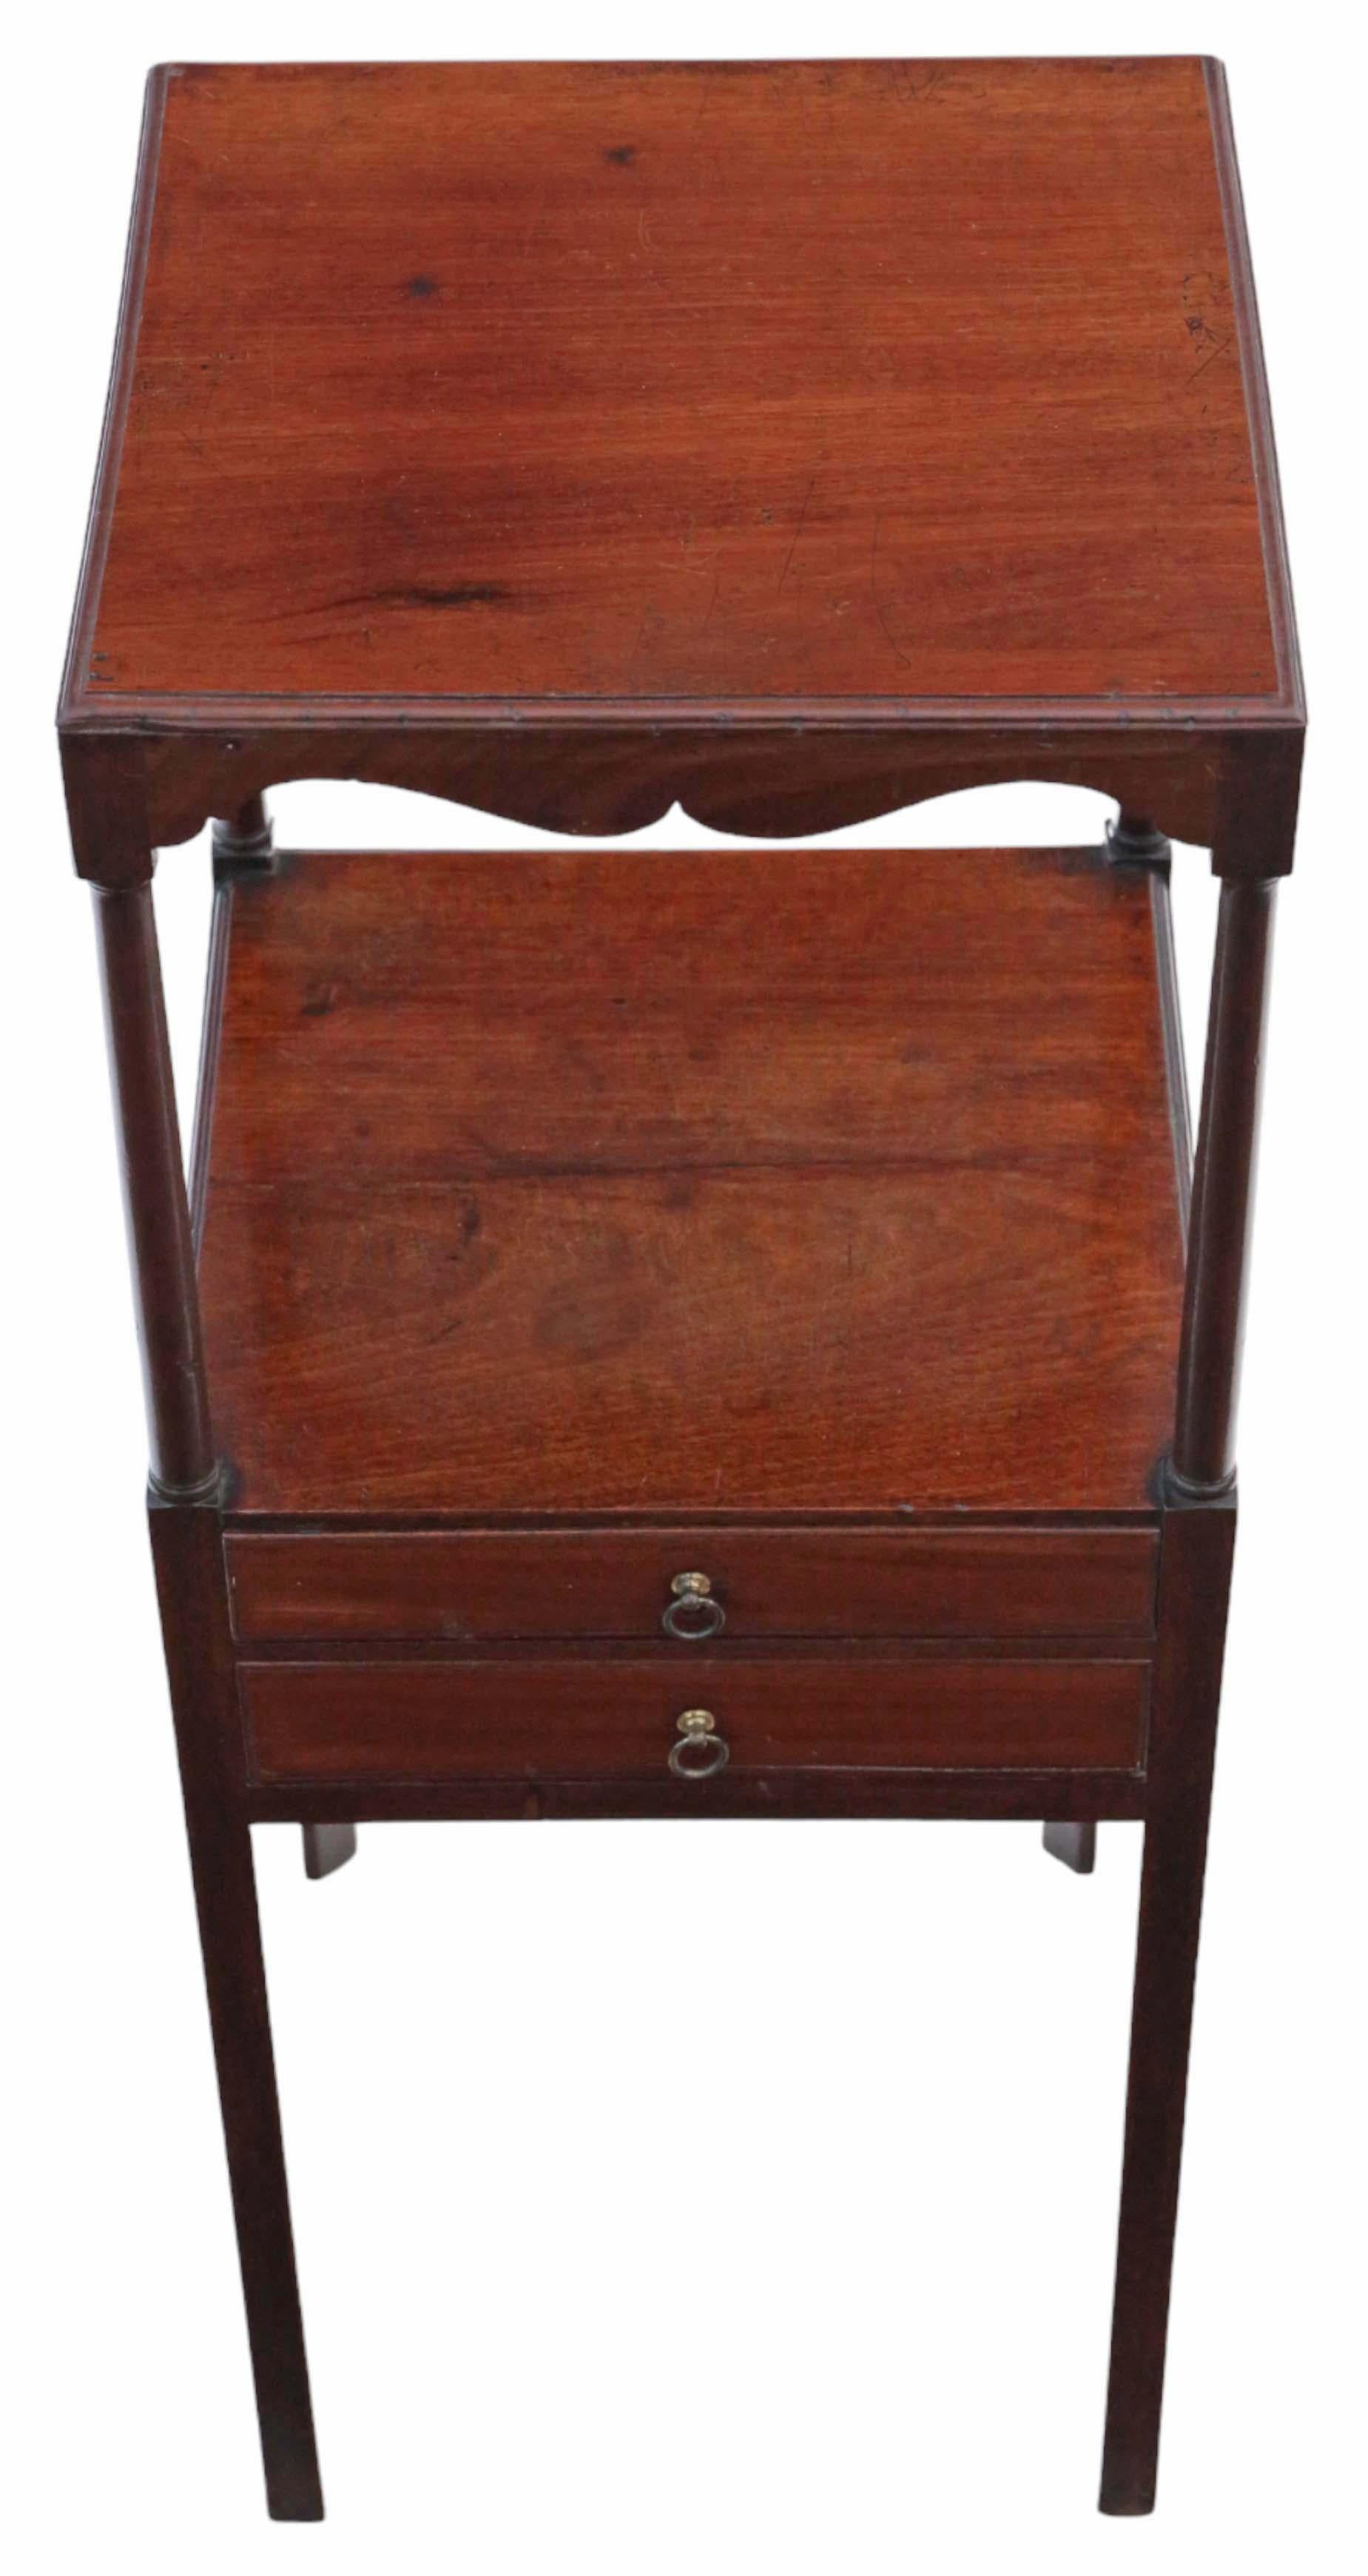 Antique mahogany washstand, bedside table, or Georgian nightstand dating back to circa 1800.

This rare and remarkable piece remains solid with no loose joints, and the drawer smoothly slides open. The item exudes a charming age, color, and